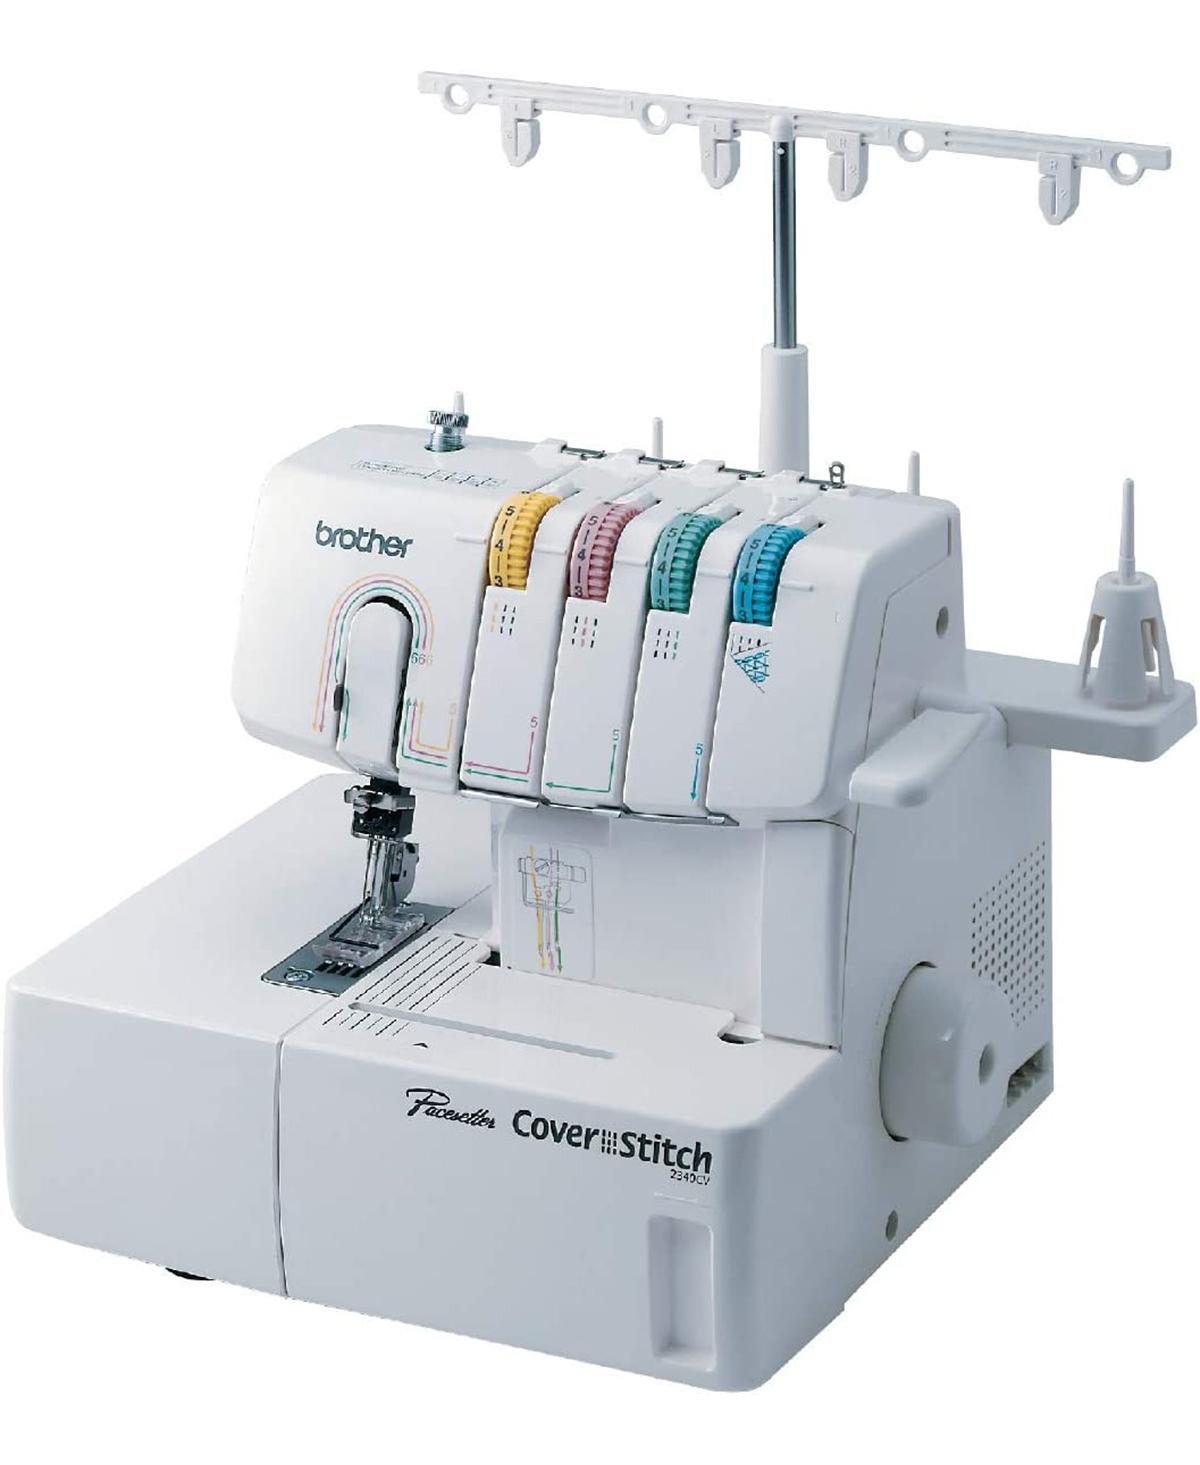 2340CV Cover Stitch Machine with Color-Coded Threading Guide - White